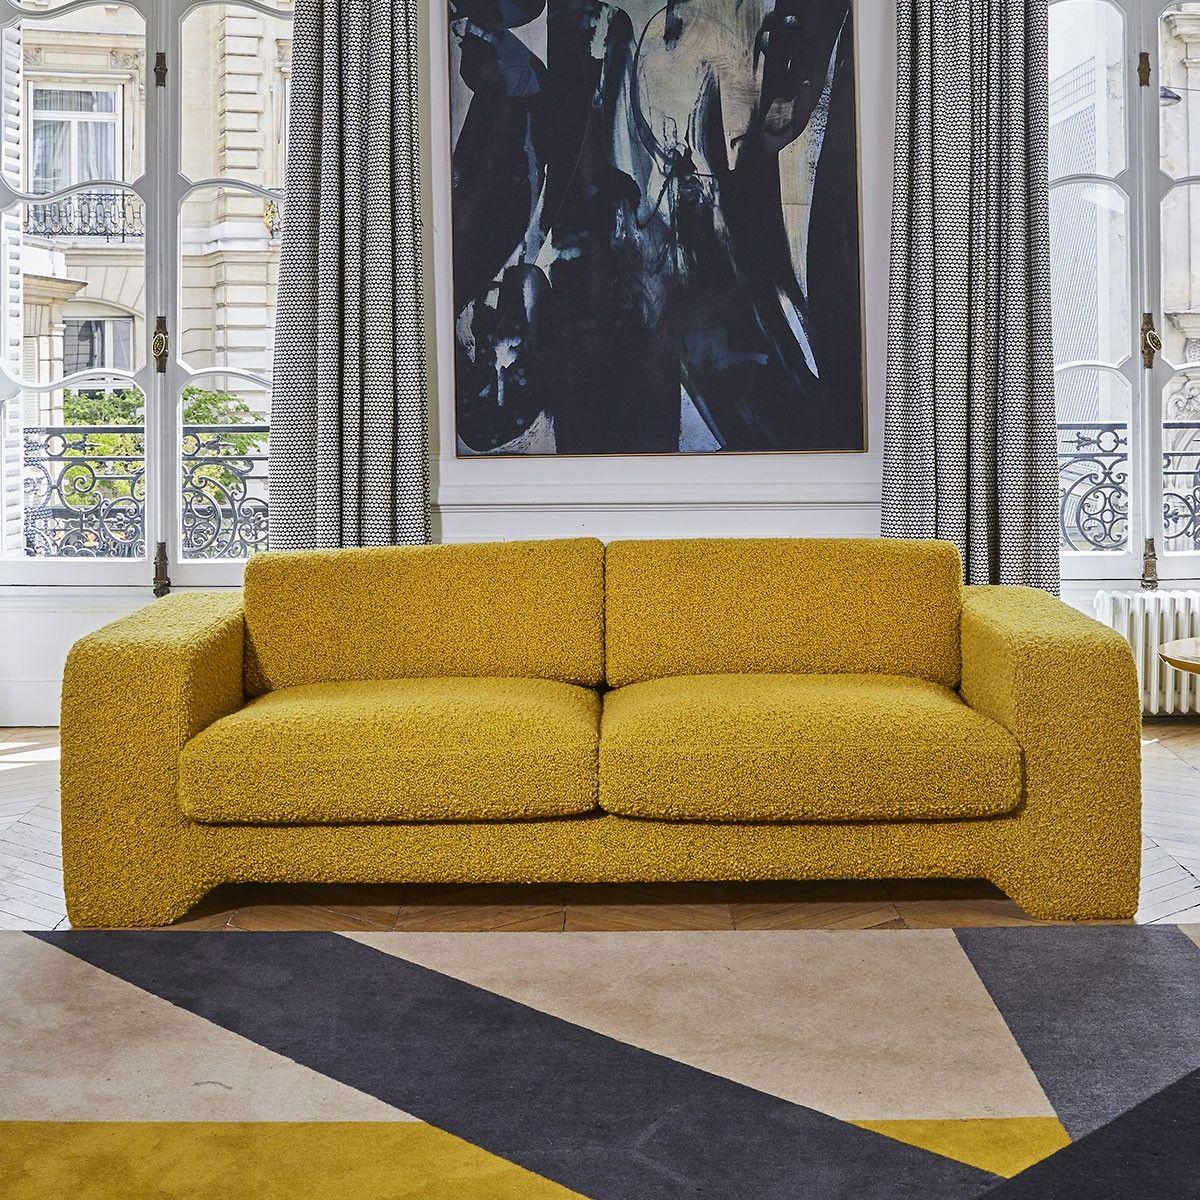 Popus Editions Giovanna 3 Seater Sofa in Amber Como Velvet Upholstery.

Giovanna is a sofa with a strong profile. A sober, plush line, with this famous detail that changes everything, so as not to forget its strength of character and this charming